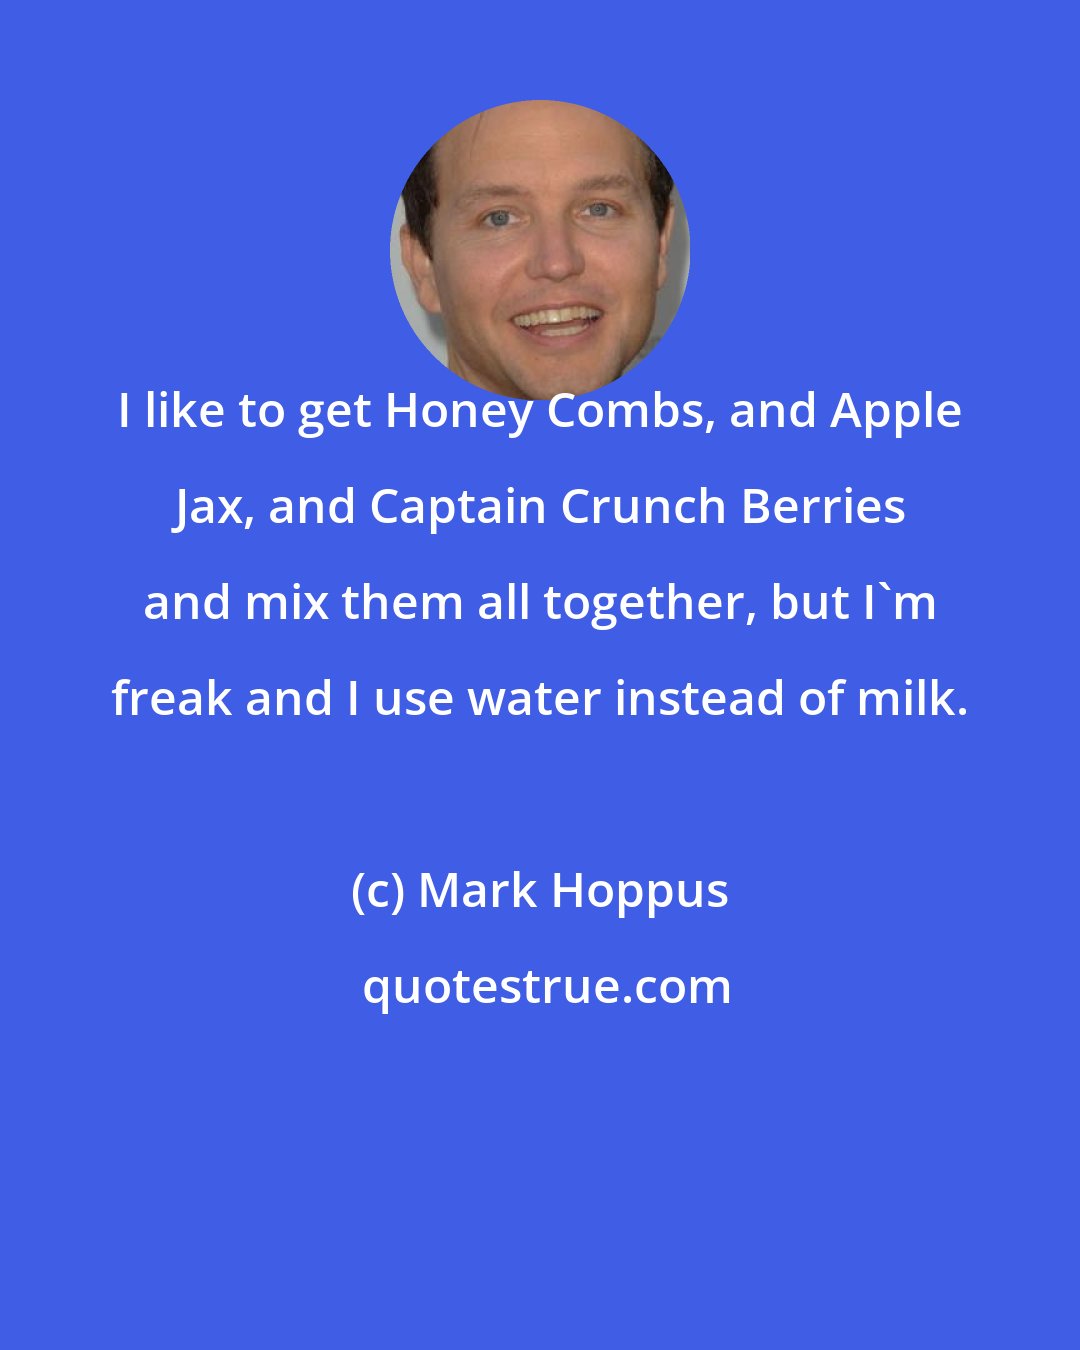 Mark Hoppus: I like to get Honey Combs, and Apple Jax, and Captain Crunch Berries and mix them all together, but I'm freak and I use water instead of milk.